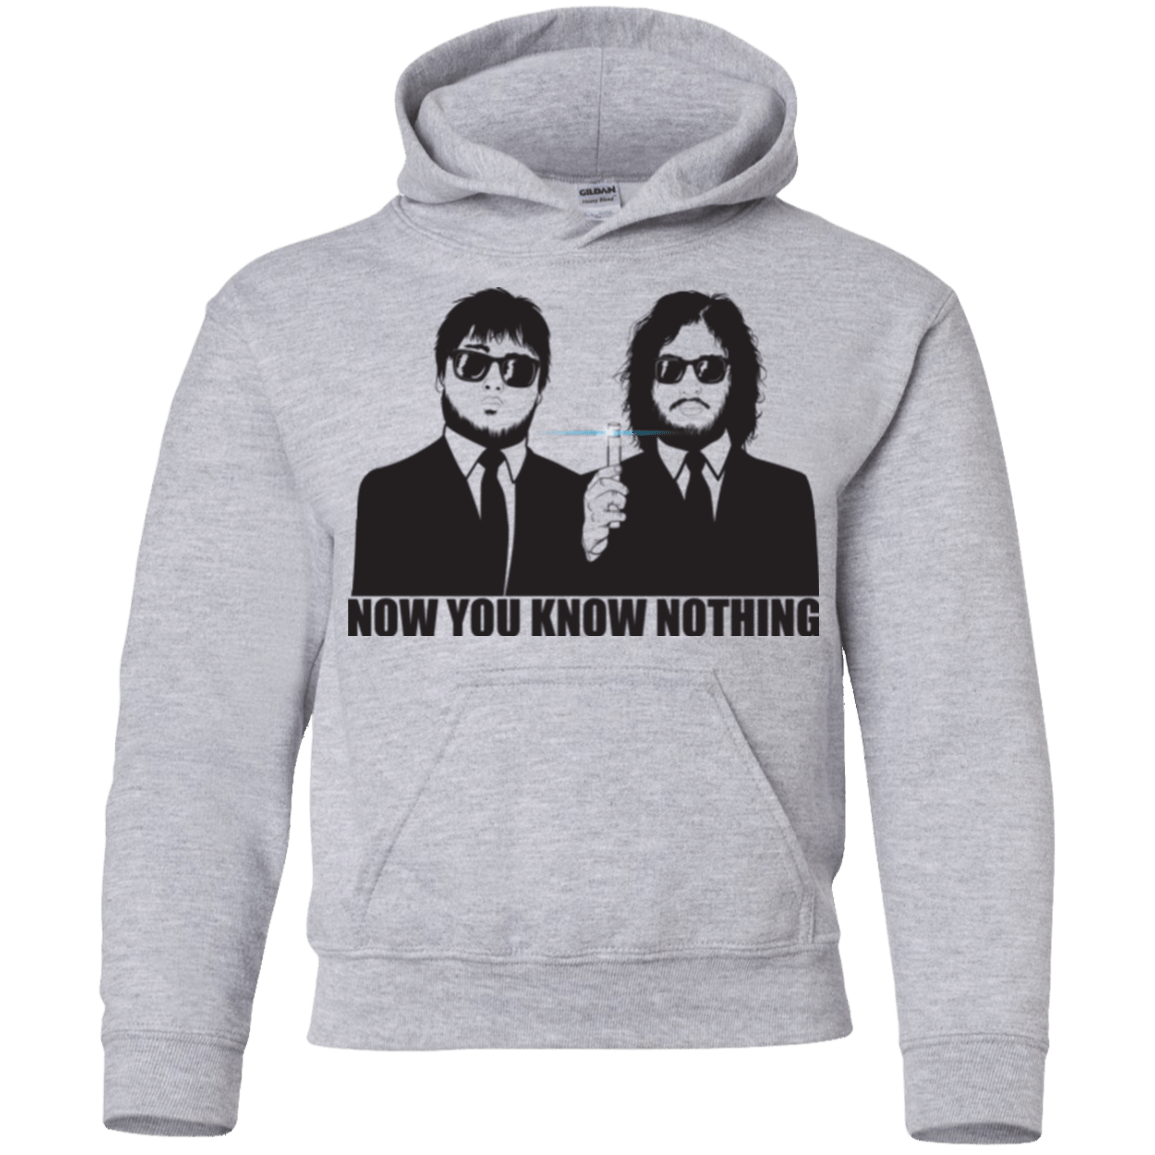 Sweatshirts Sport Grey / YS NOW YOU KNOW NOTHING Youth Hoodie